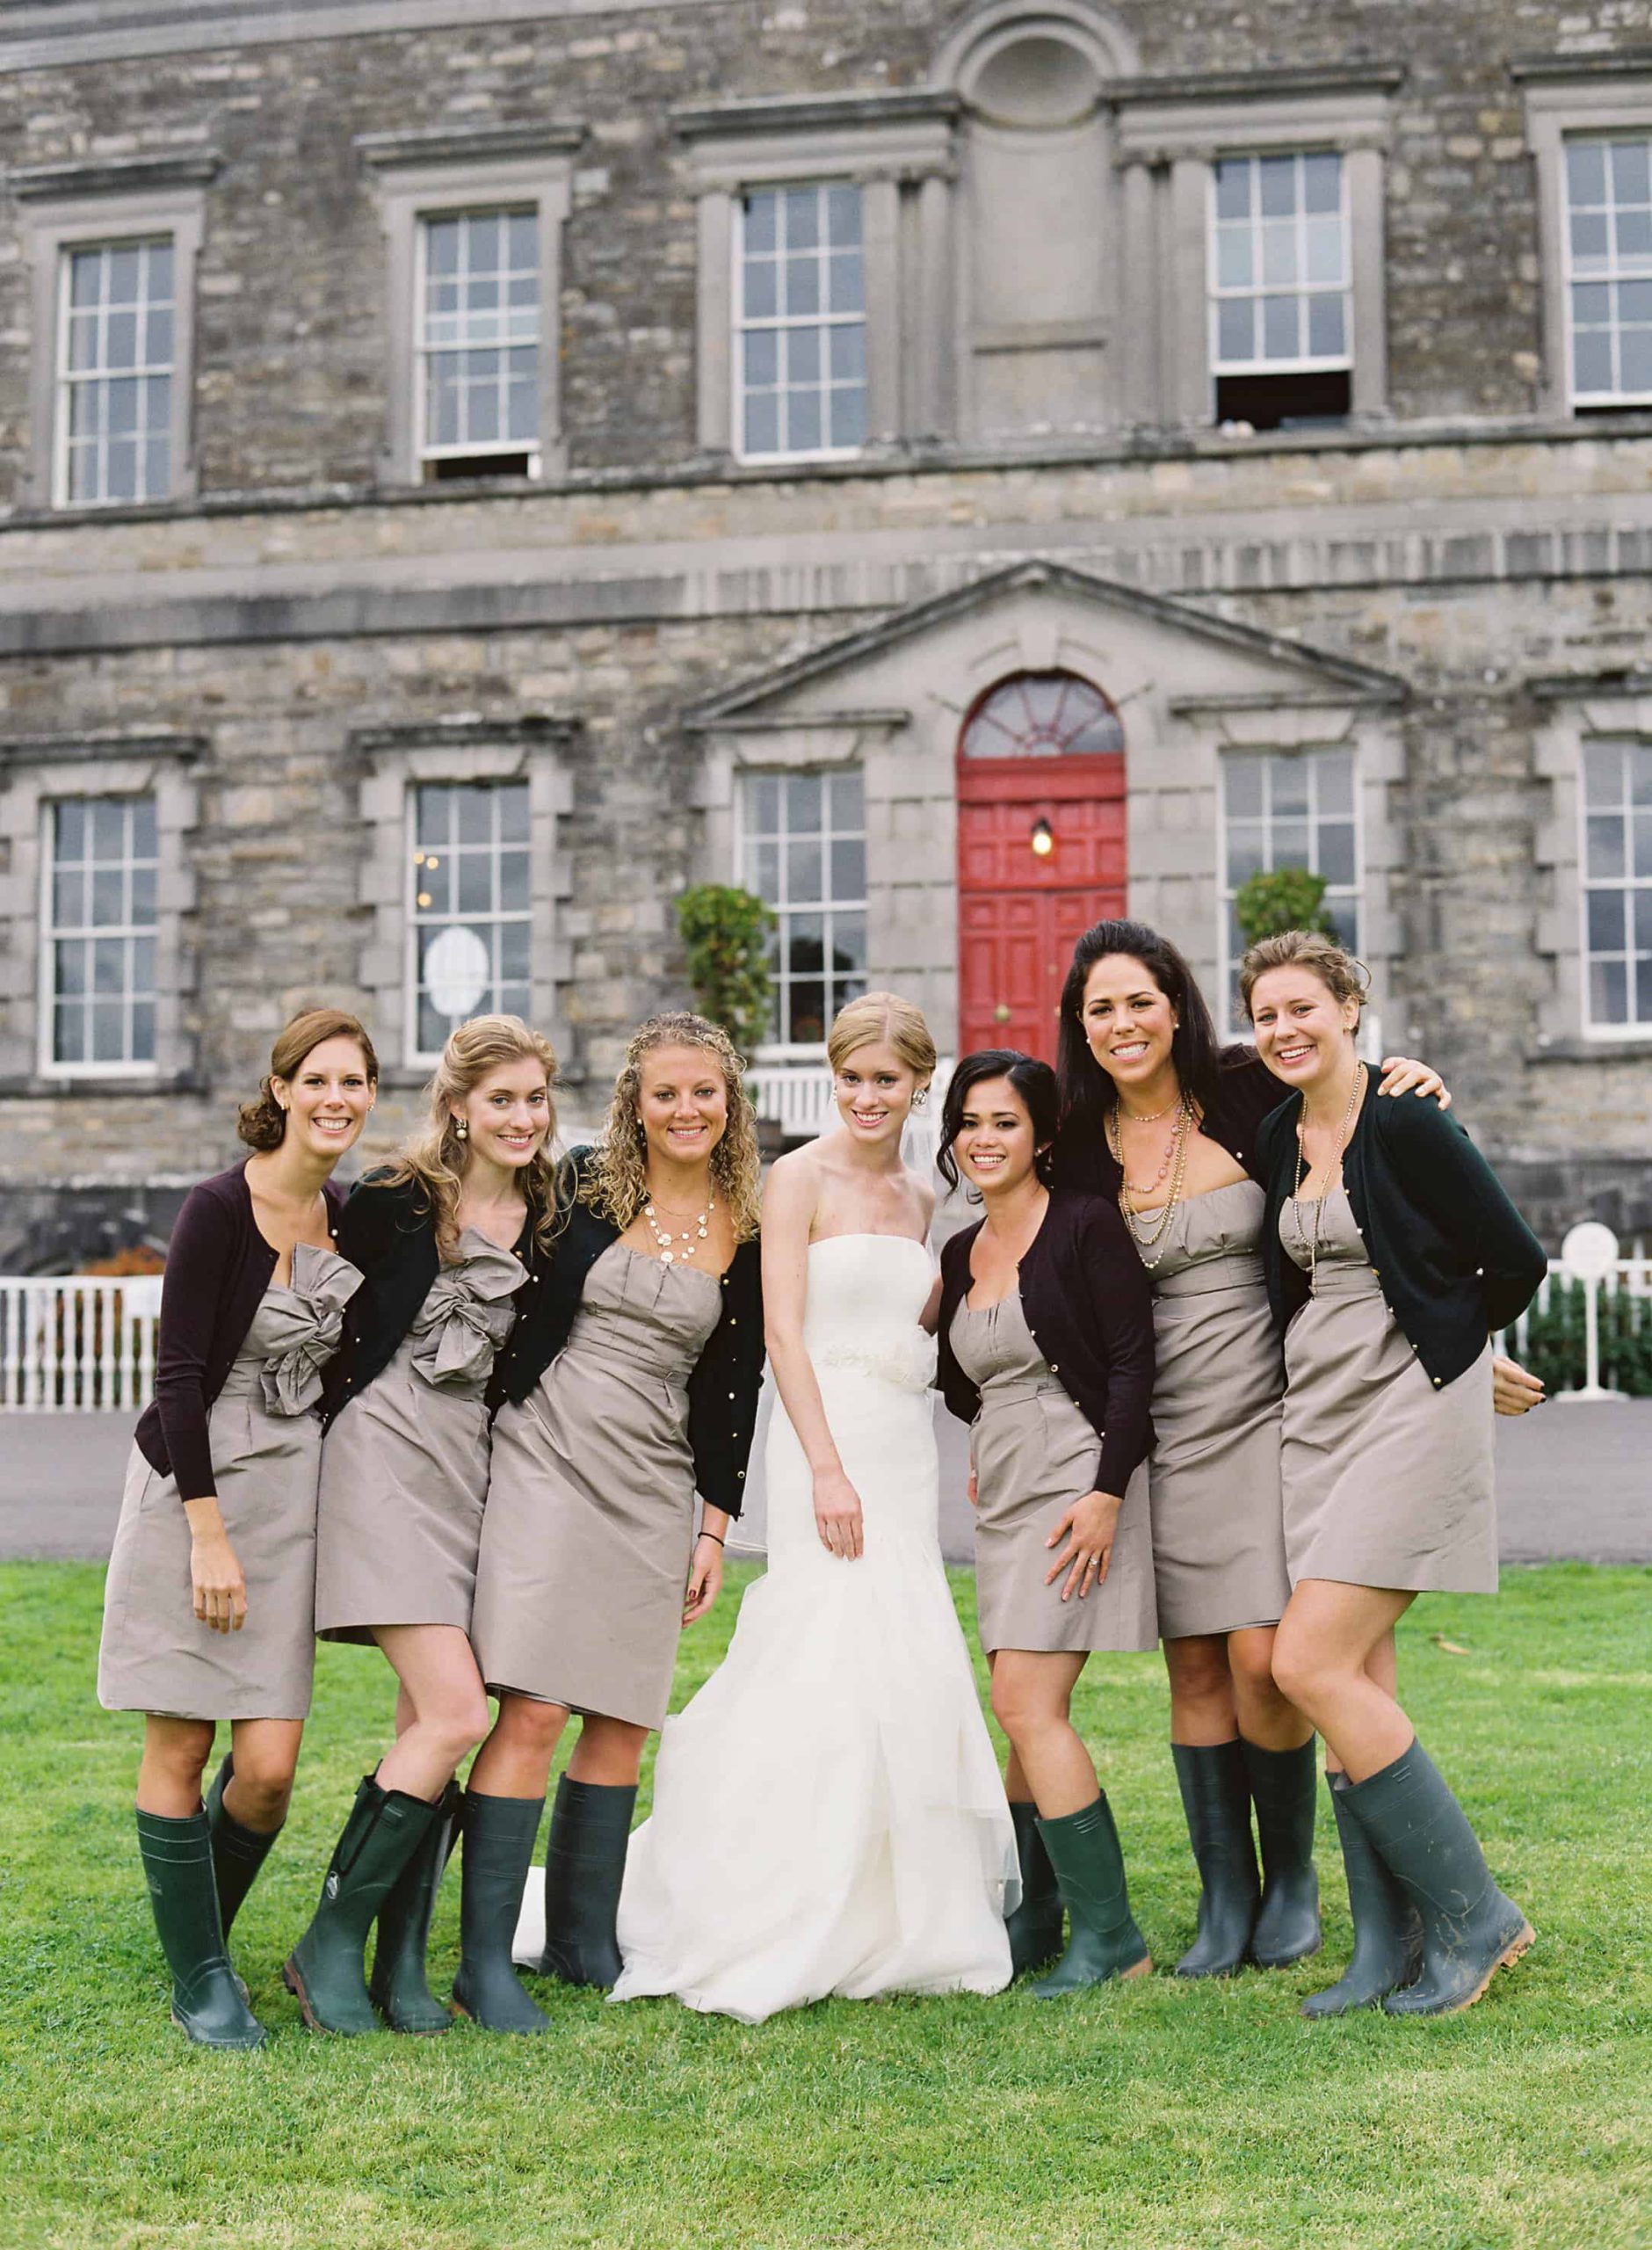 Bride with ridesmaids in wellies